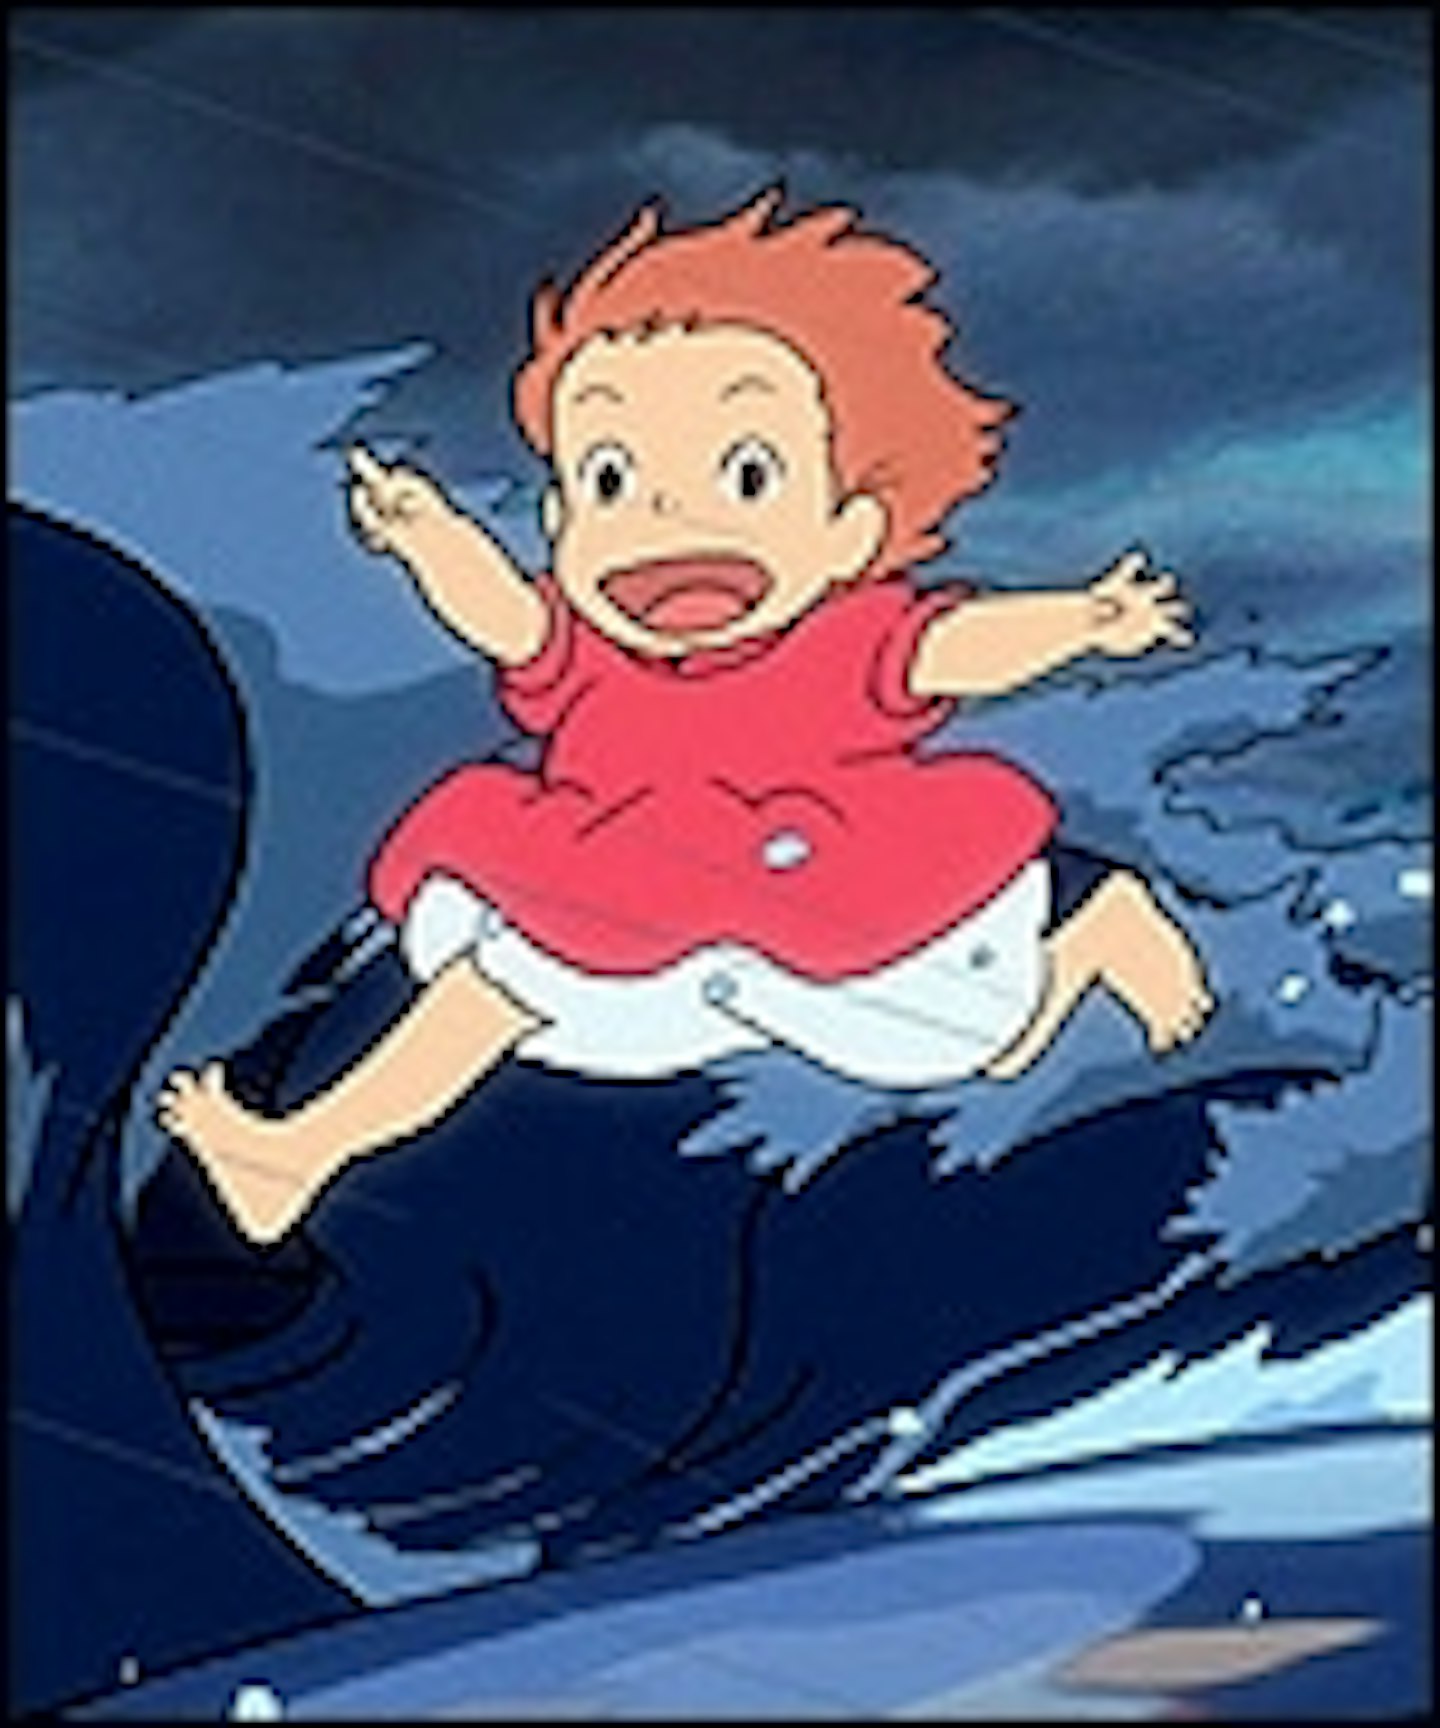 Ponyo - Official Trailer 